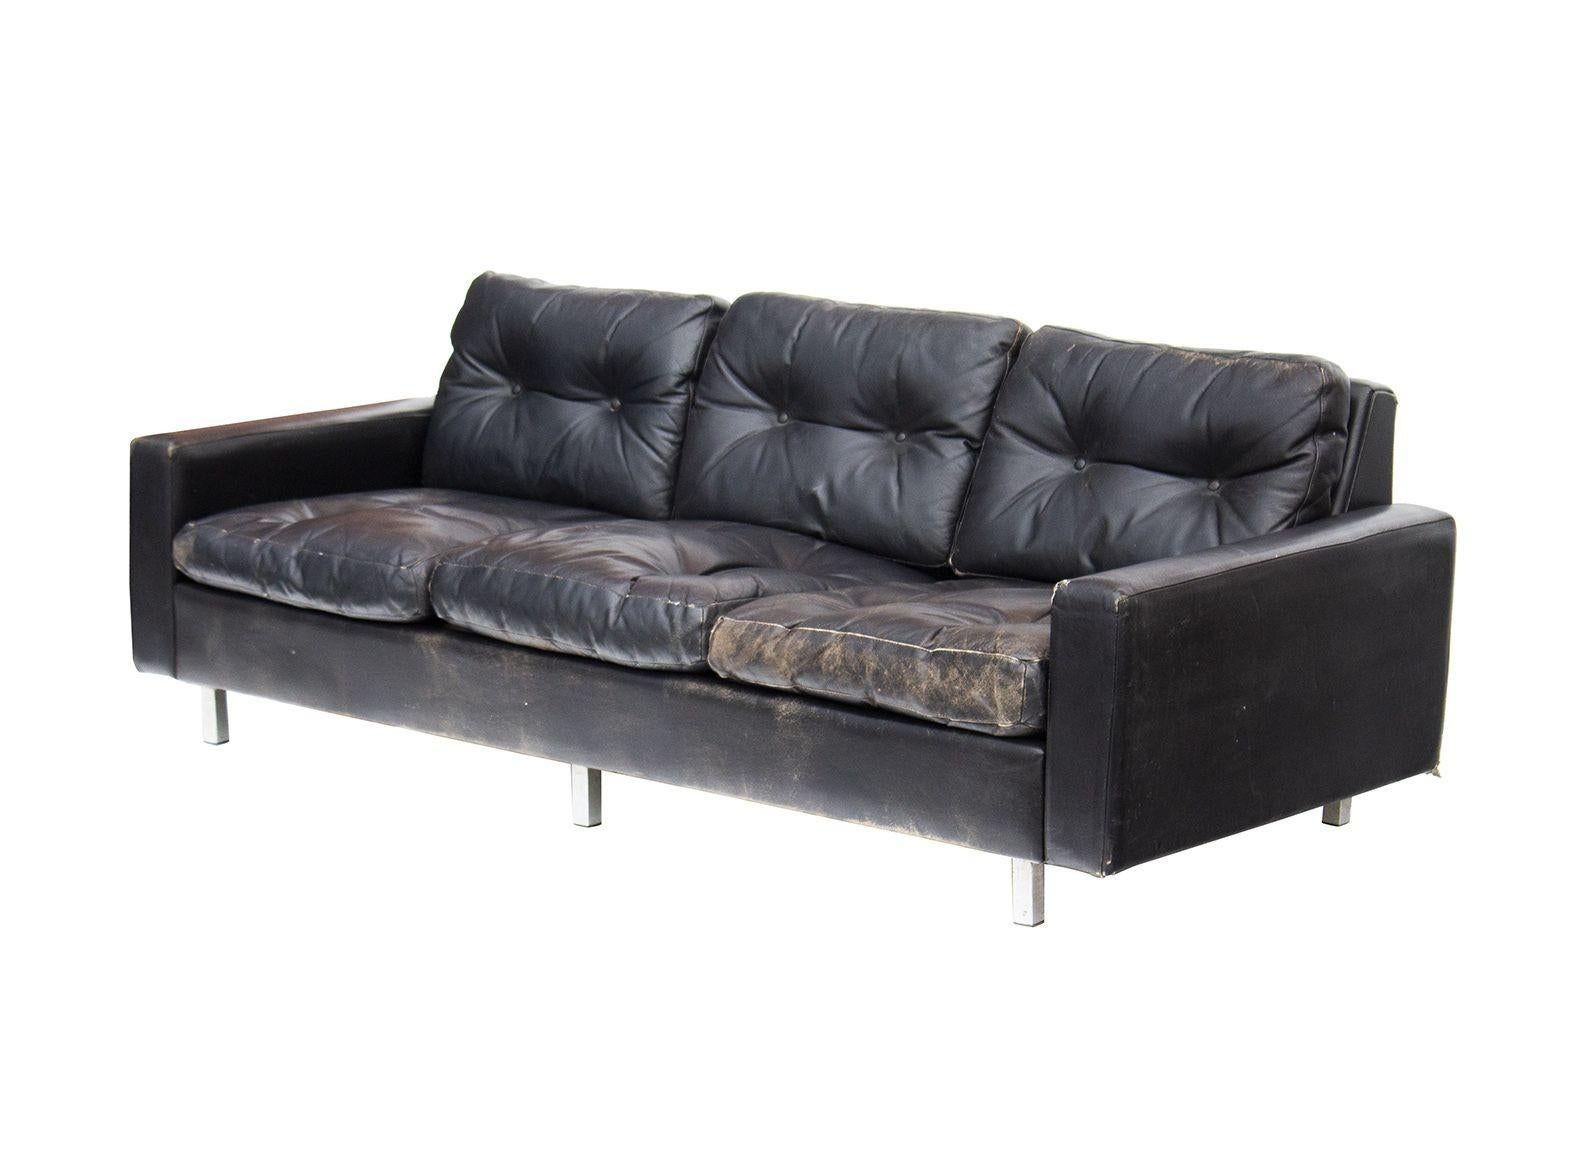 Europe, 1960s
High quality tufted black leather sofa with down filled cushions. Purchased from a design store in Amsterdam in the 1960s and later imported to the US. This is an excellent size- and very comfortable. Heavy and substantial frame. No